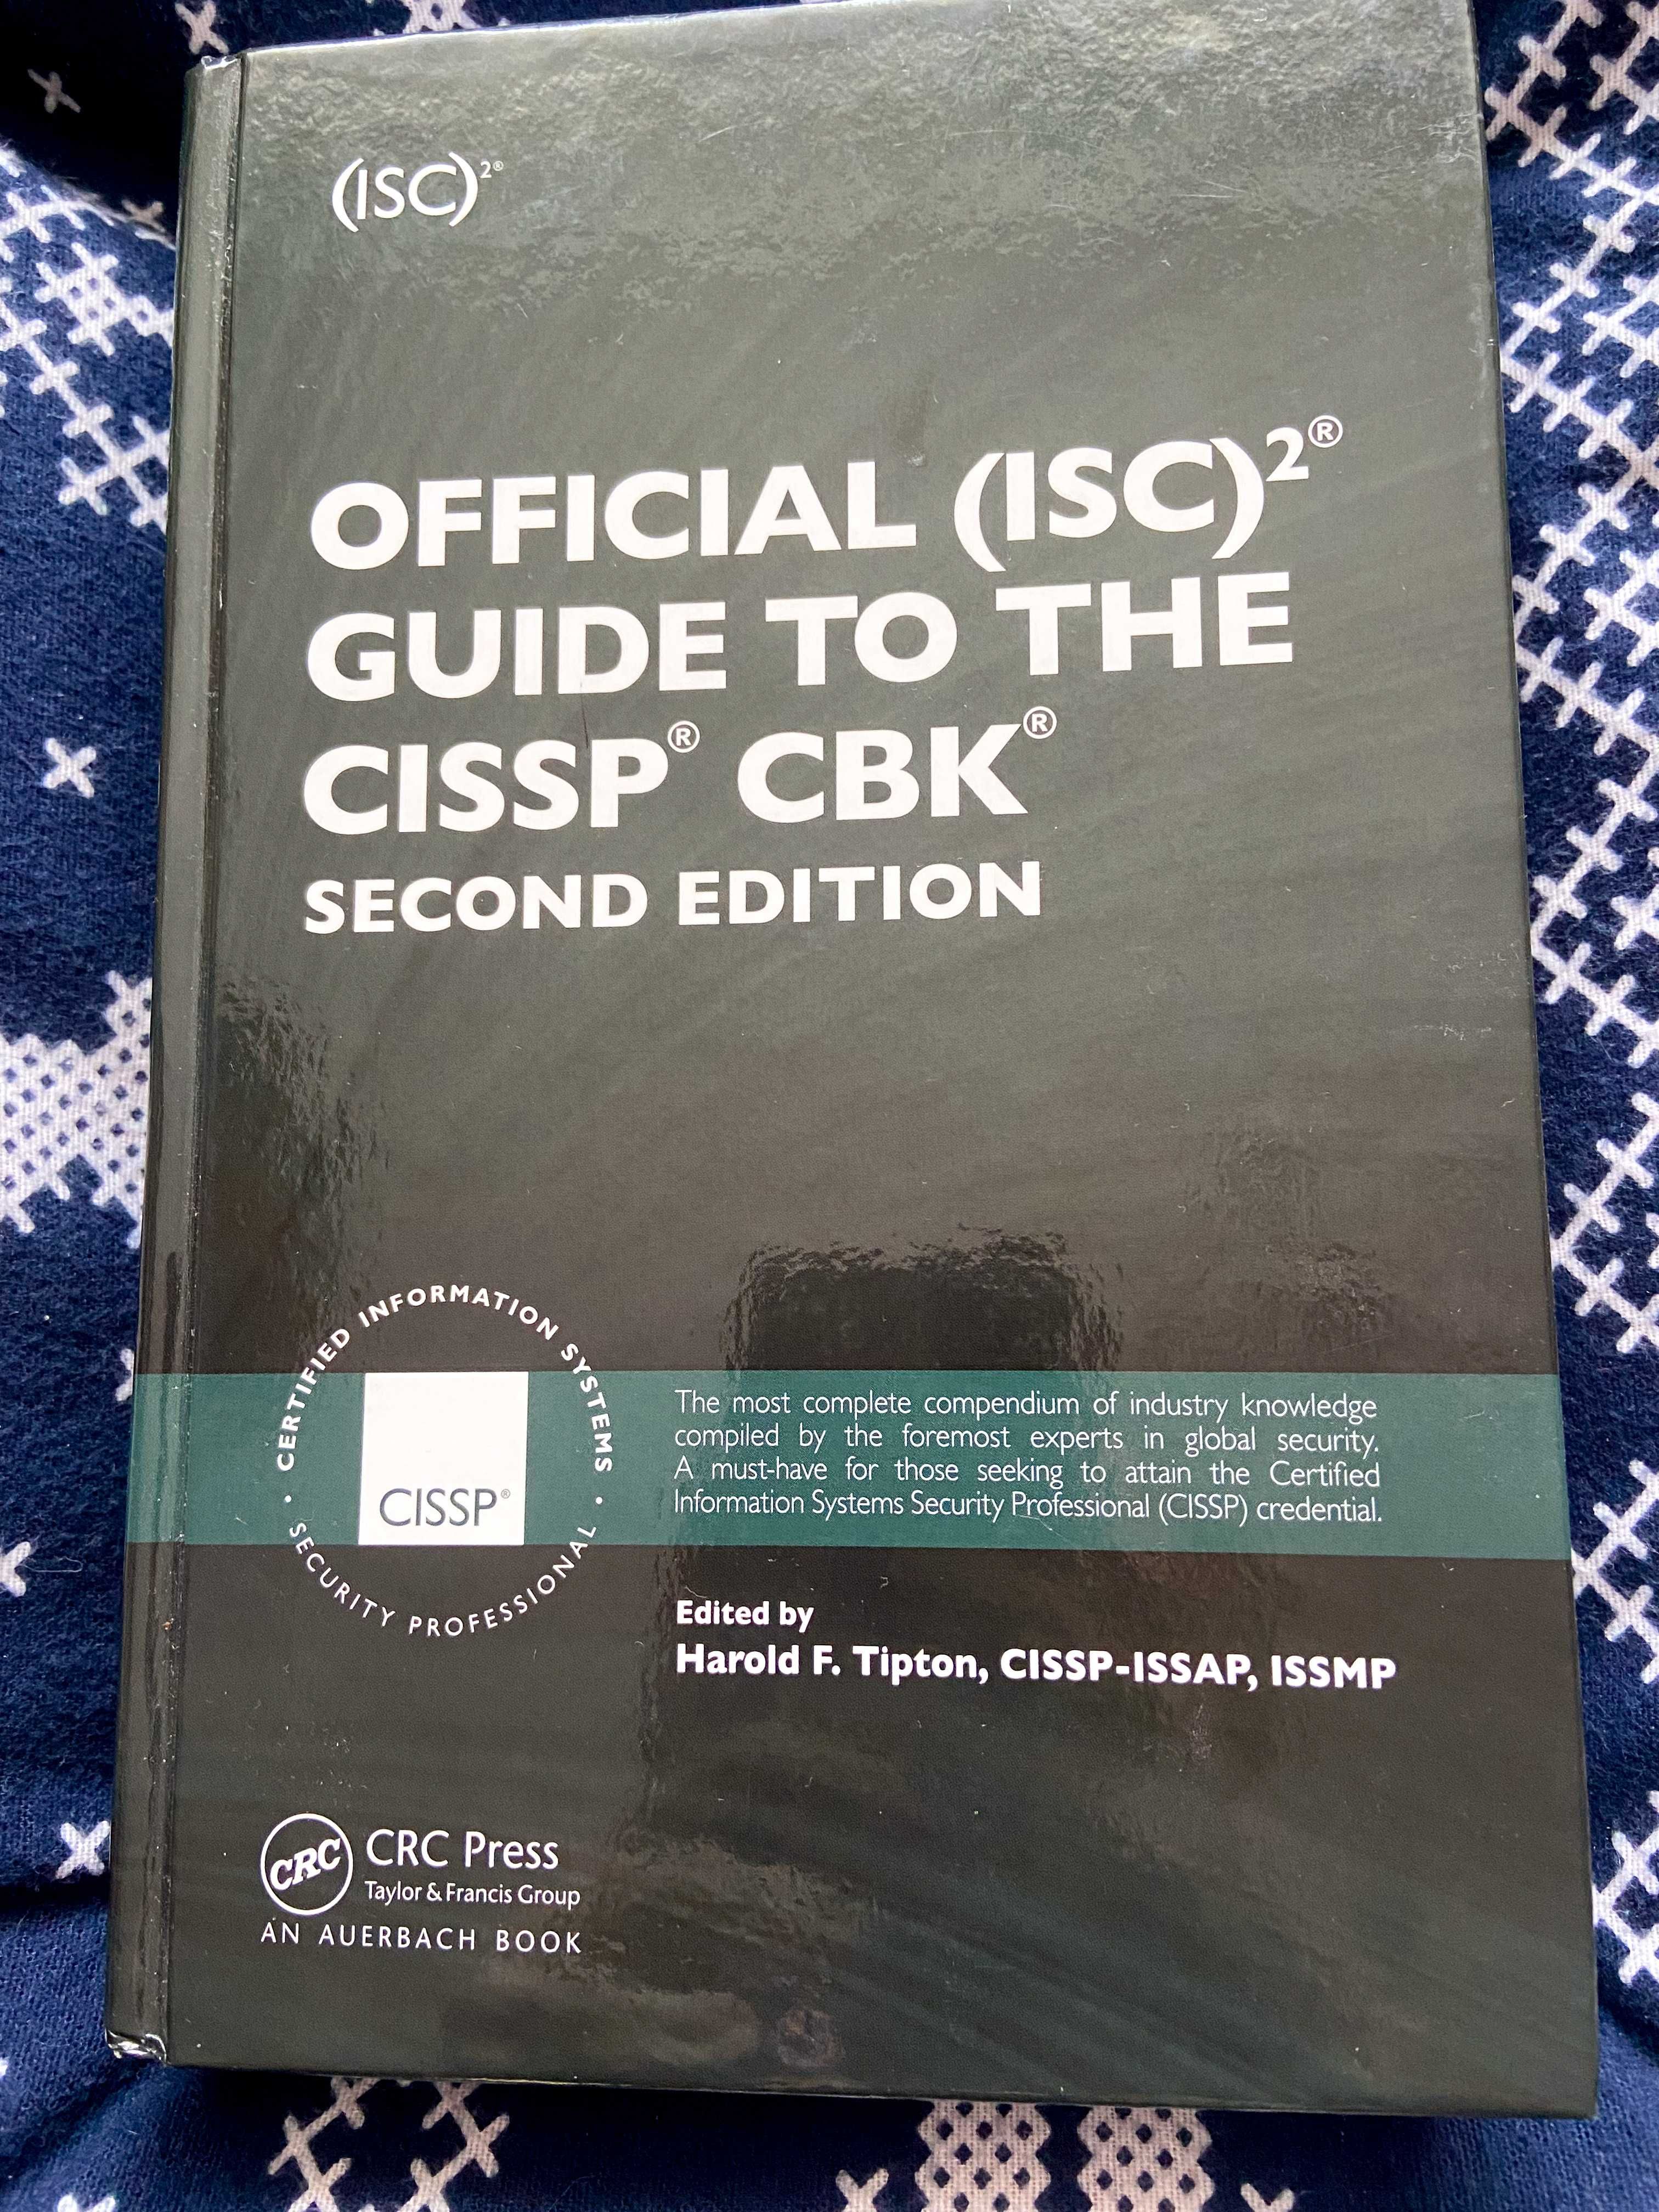 Official isc guide to the CISSP cbk DRUGA EDYCJA